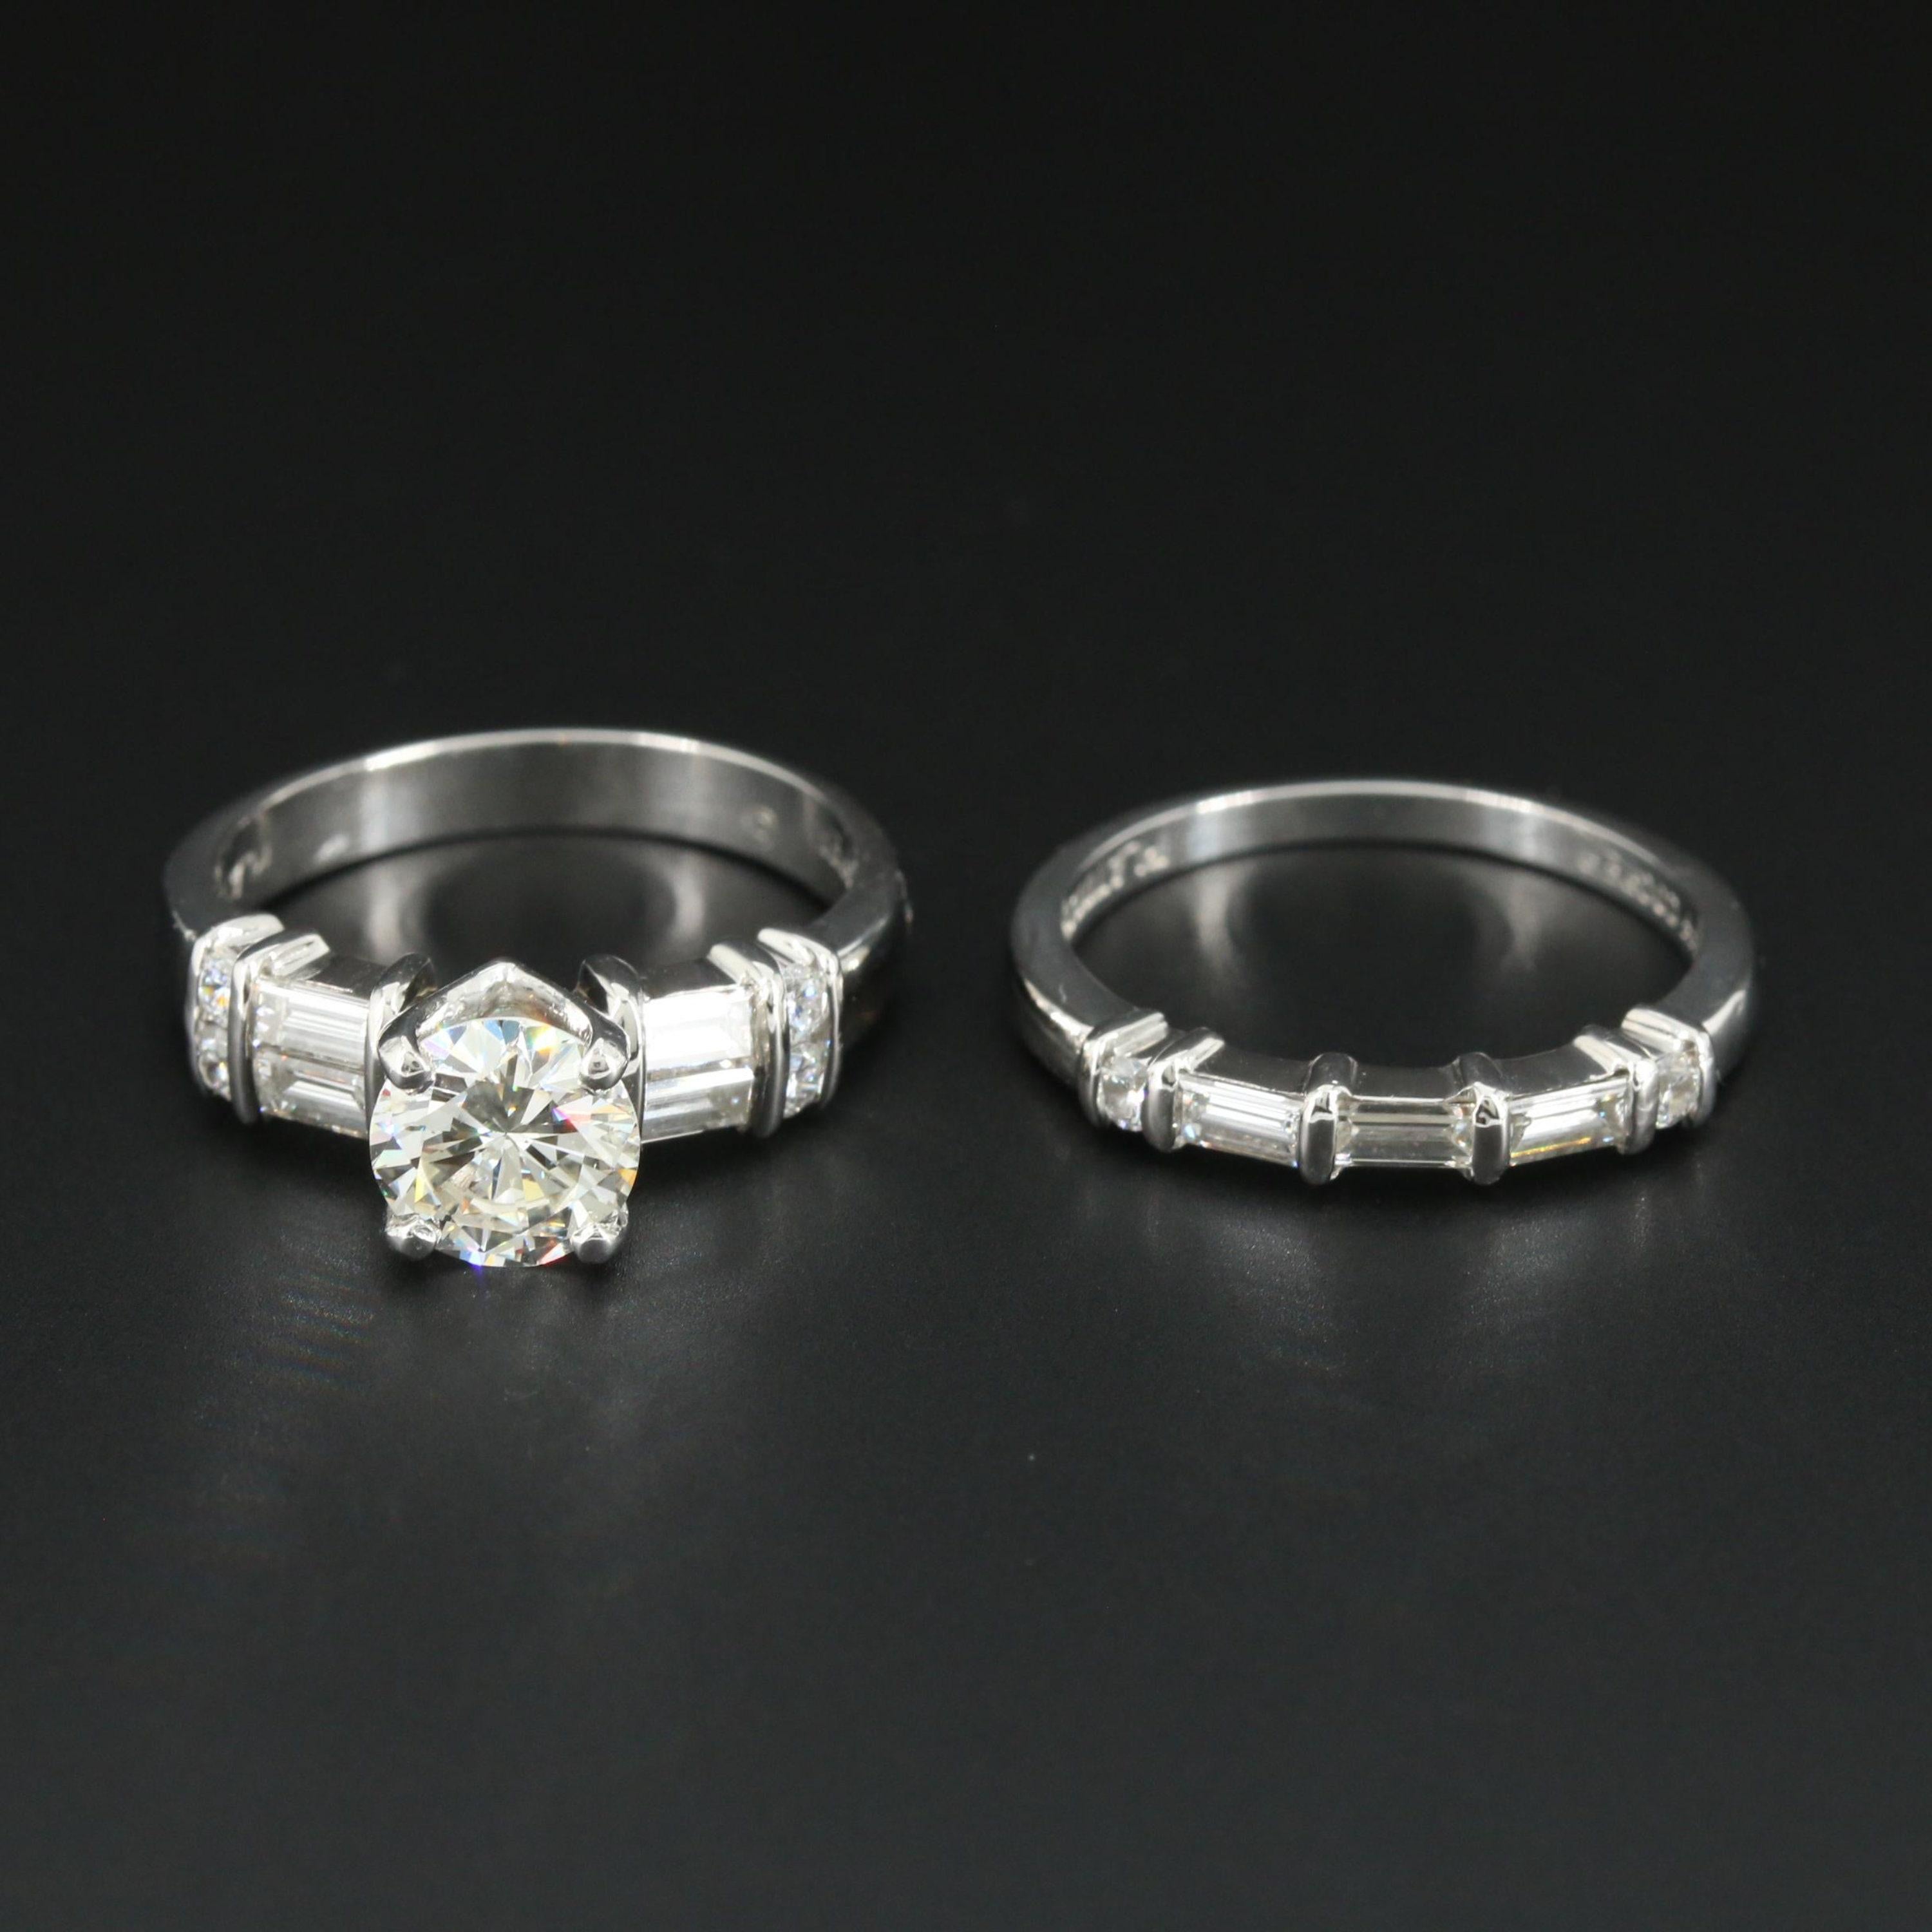 For Sale:  Certified 3.3 CT Diamond Art Deco Style Bridal Ring Set Diamond Engagement Ring 6